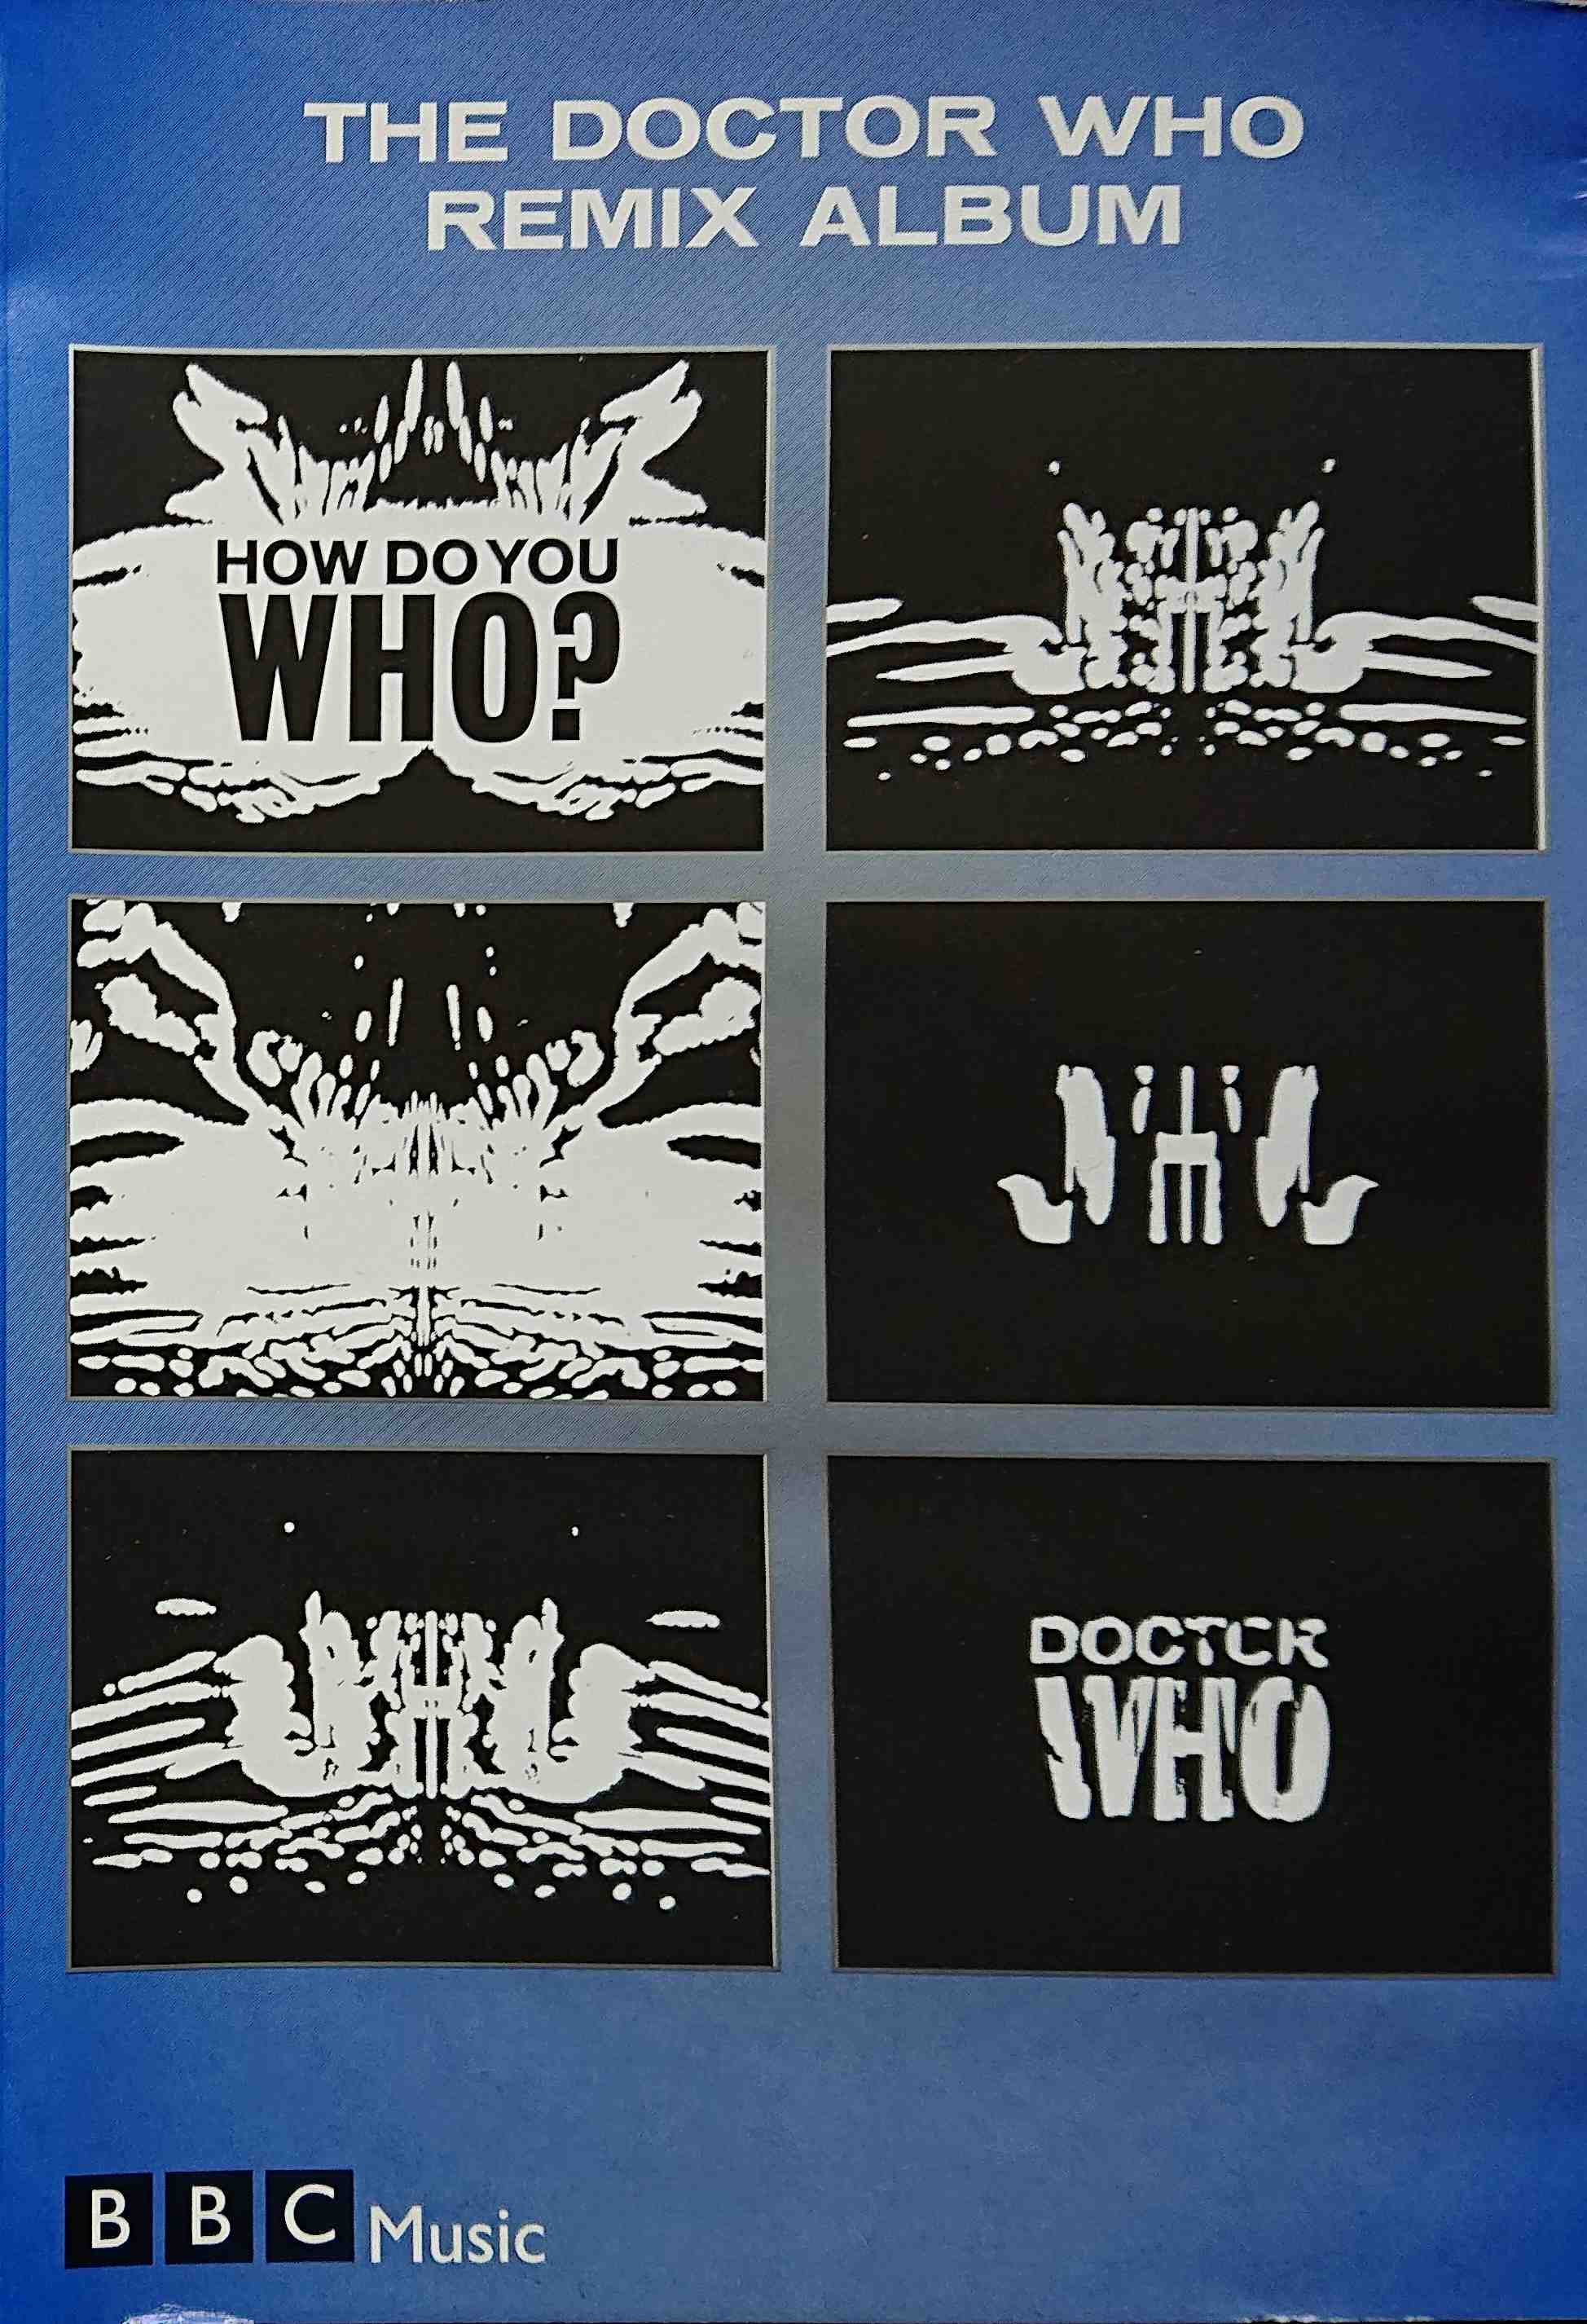 Picture of DVD-TDWRA Doctor Who - The Doctor Who remix album by artist Various from the BBC dvds - Records and Tapes library